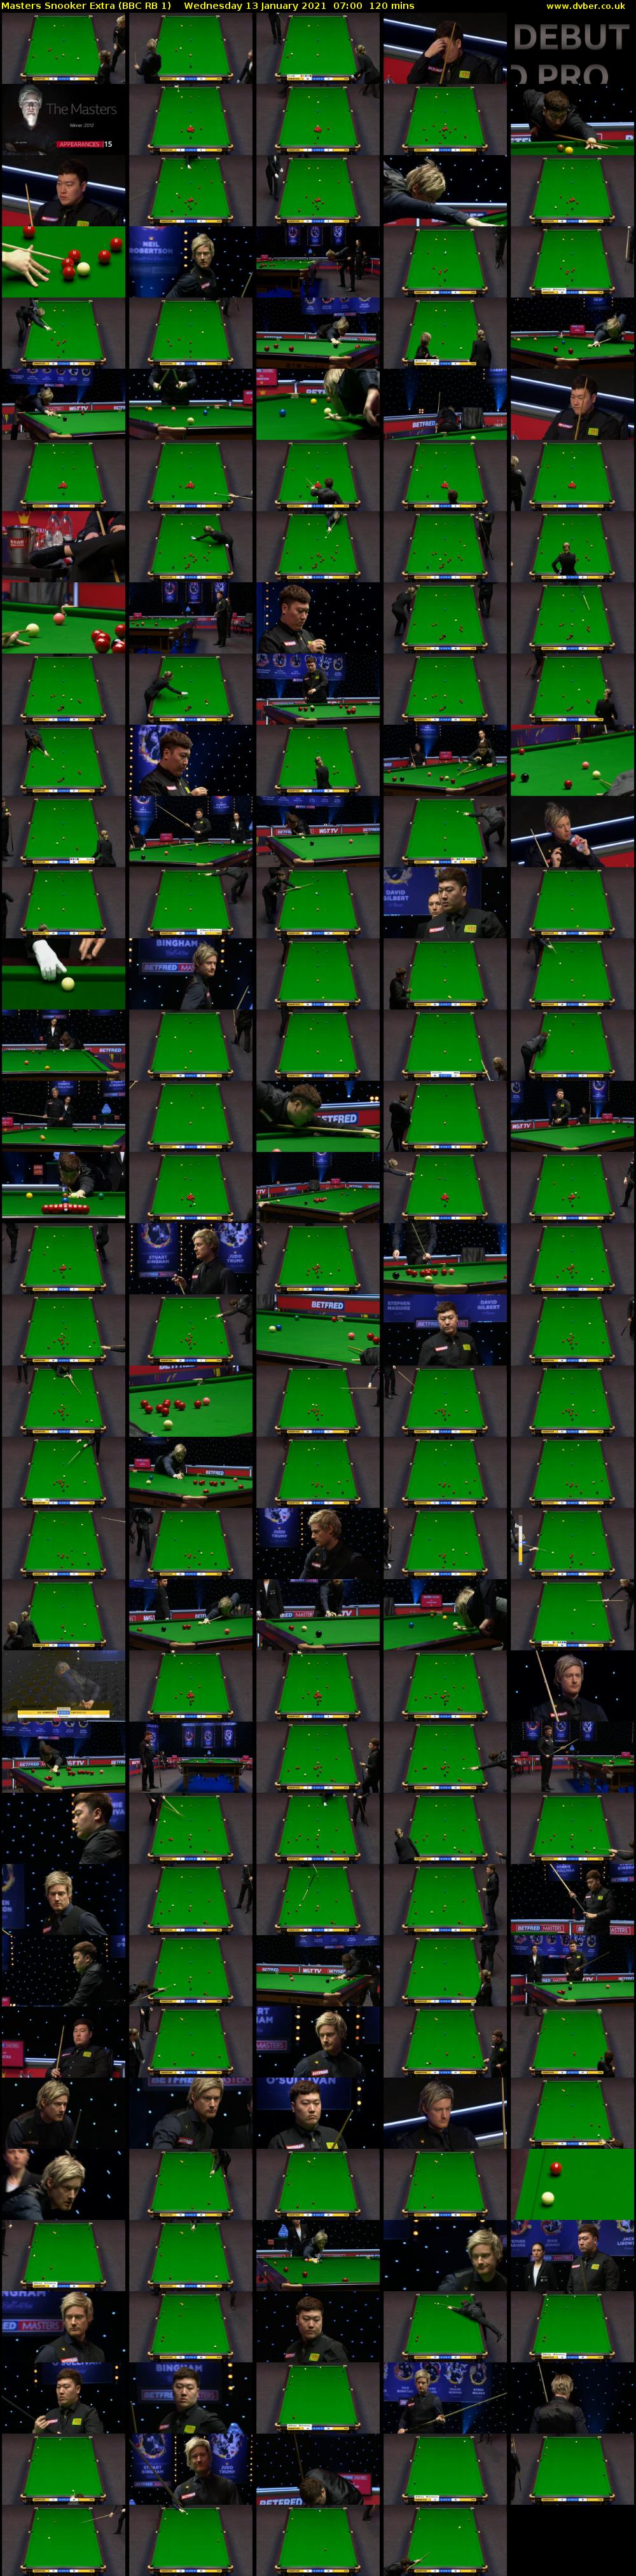 Masters Snooker Extra (BBC RB 1) Wednesday 13 January 2021 07:00 - 09:00